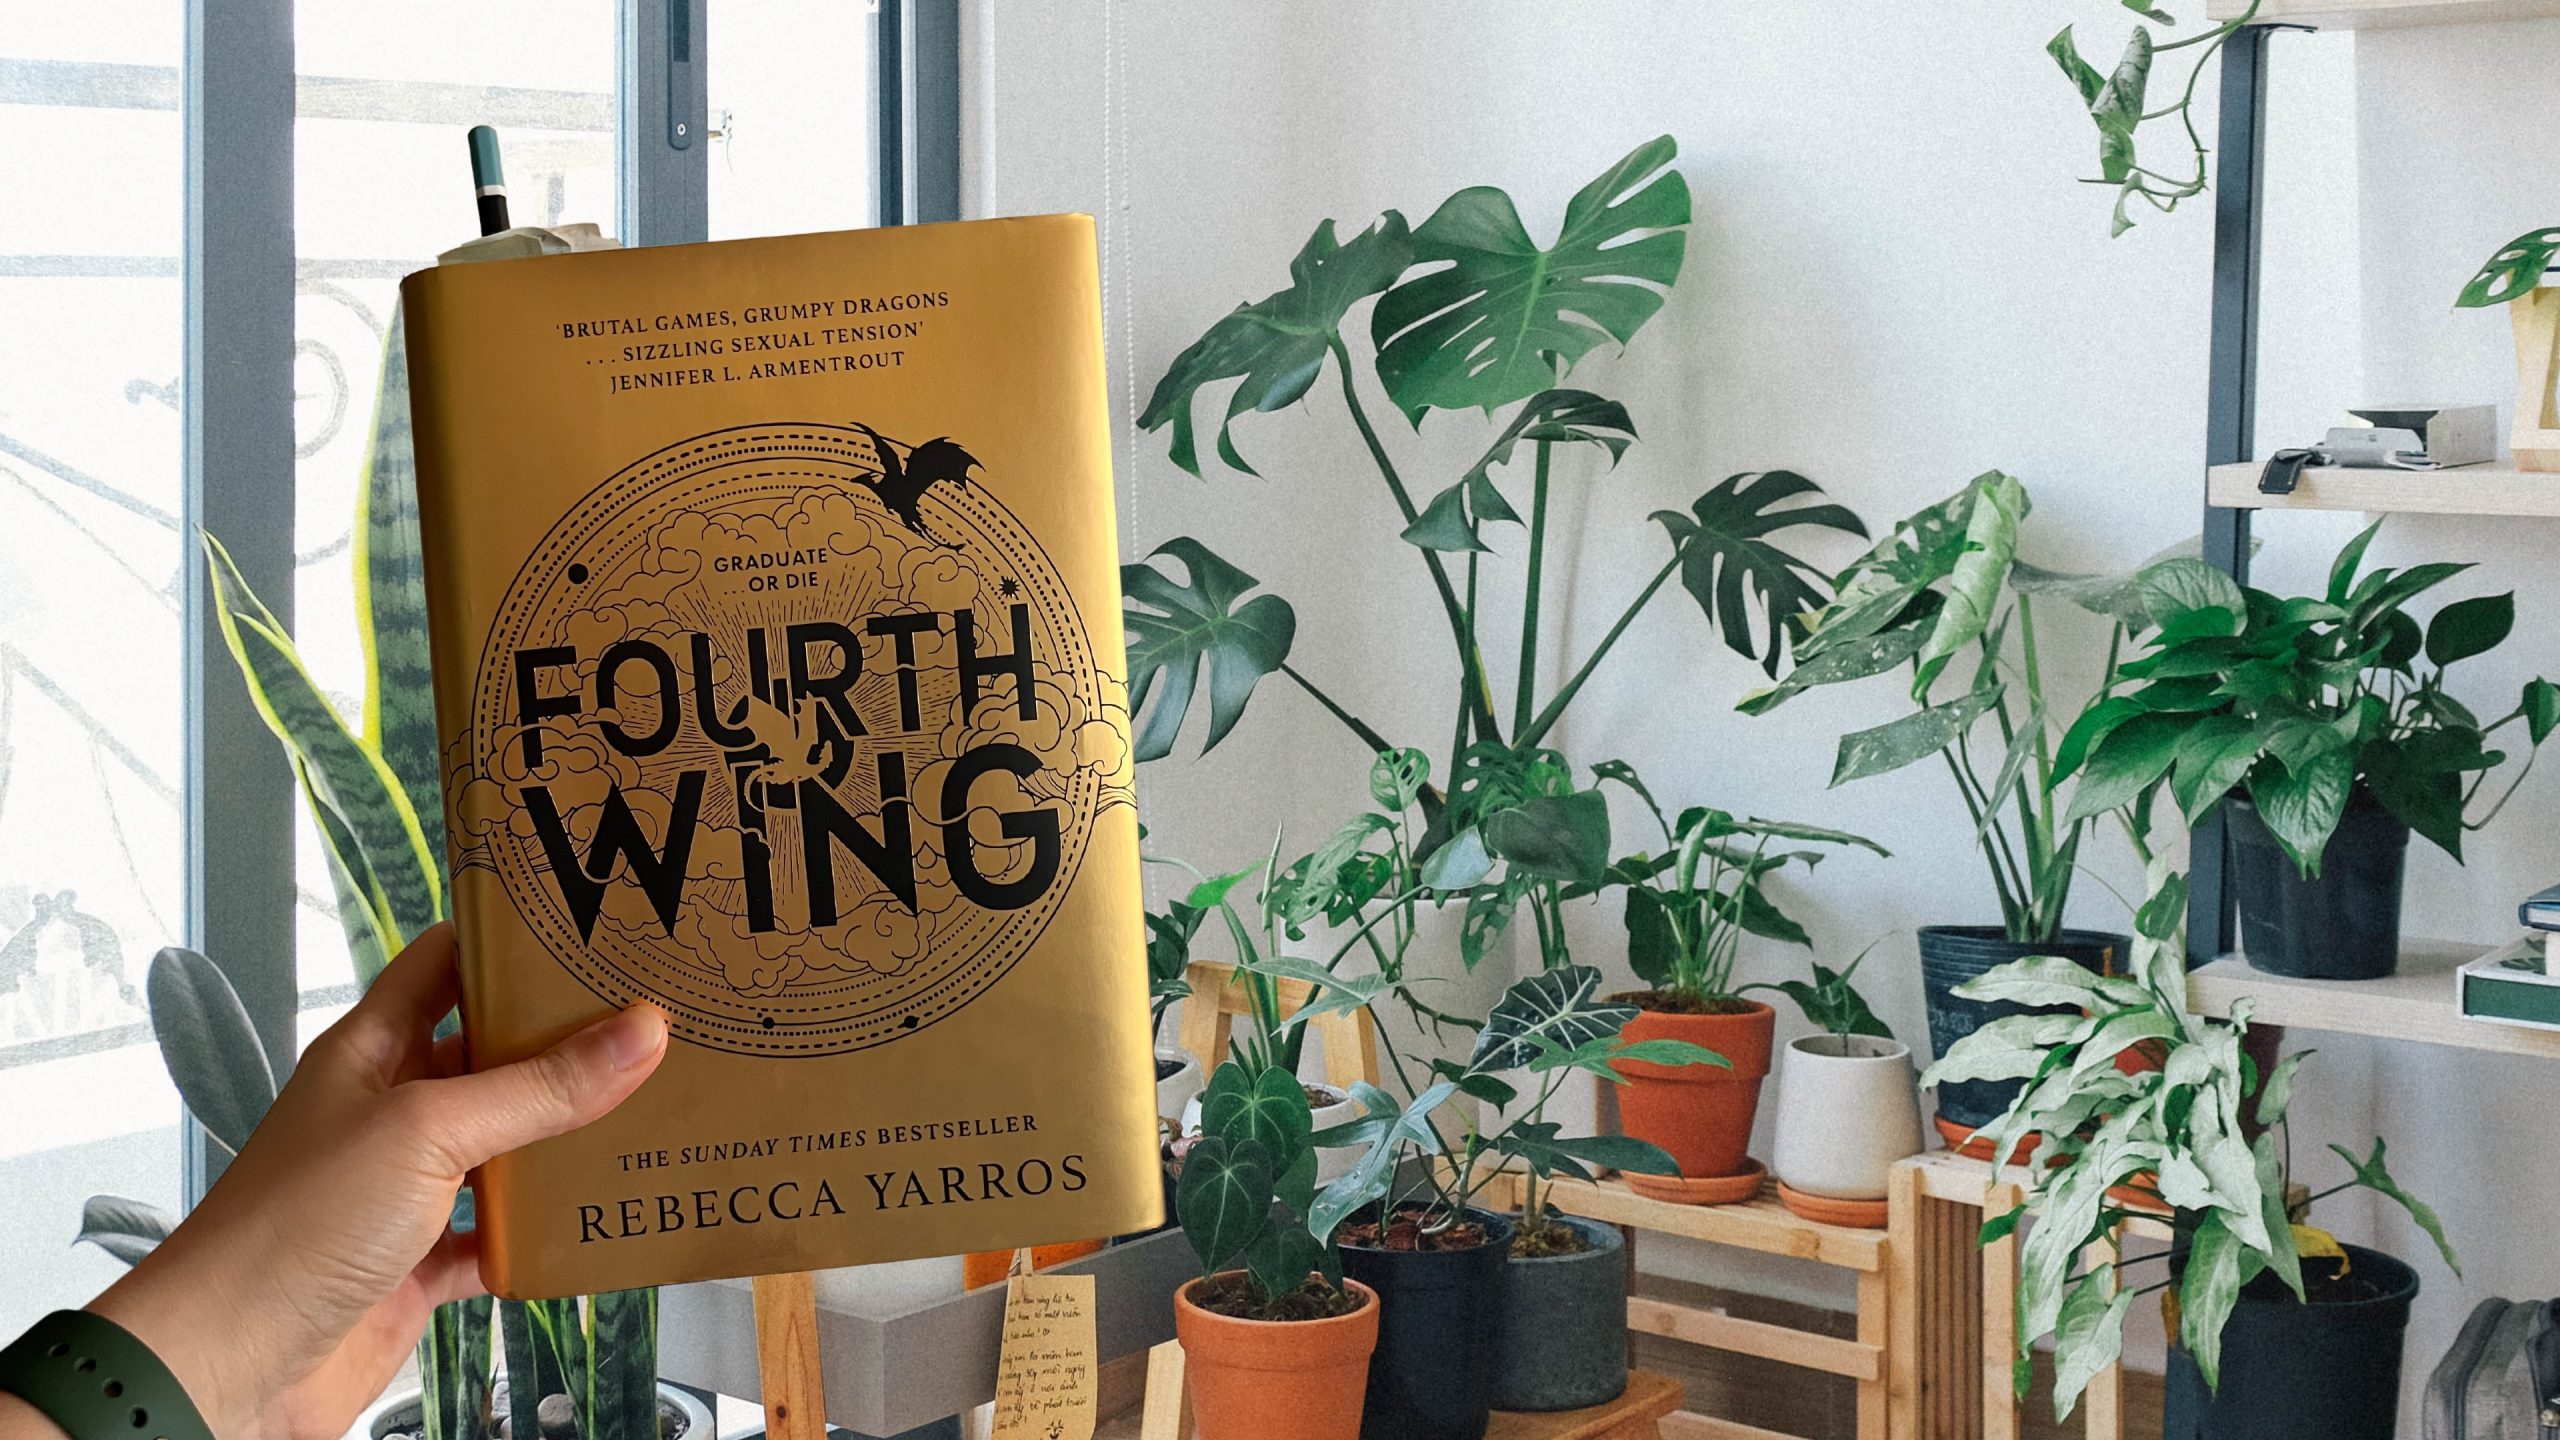 Is Fourth Wing Spicy? My hardcover book by Rebecca Yarros